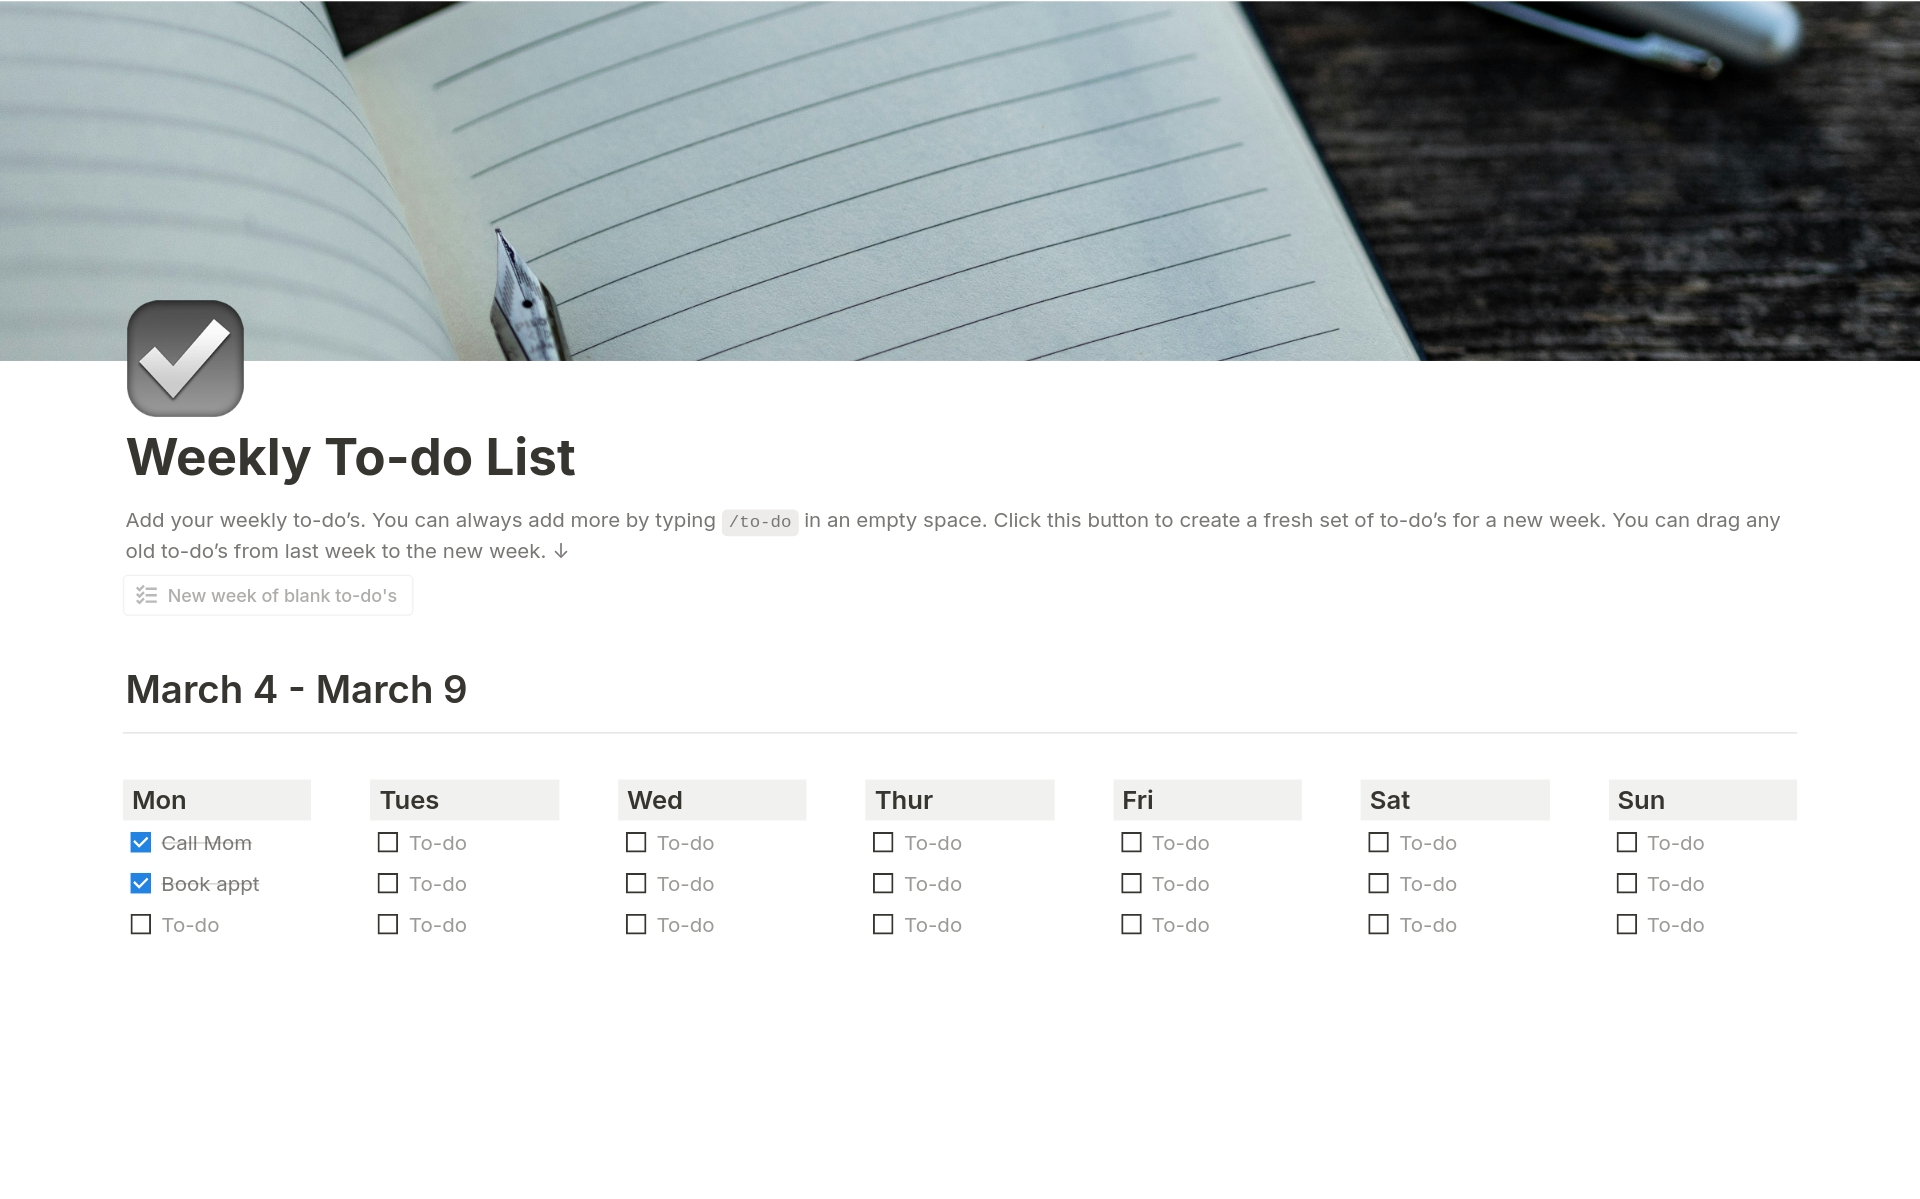 Use this template to plan and organize all the work you need to accomplish over the next week. Visualize your most important to-do's with an agenda that helps you prioritize.